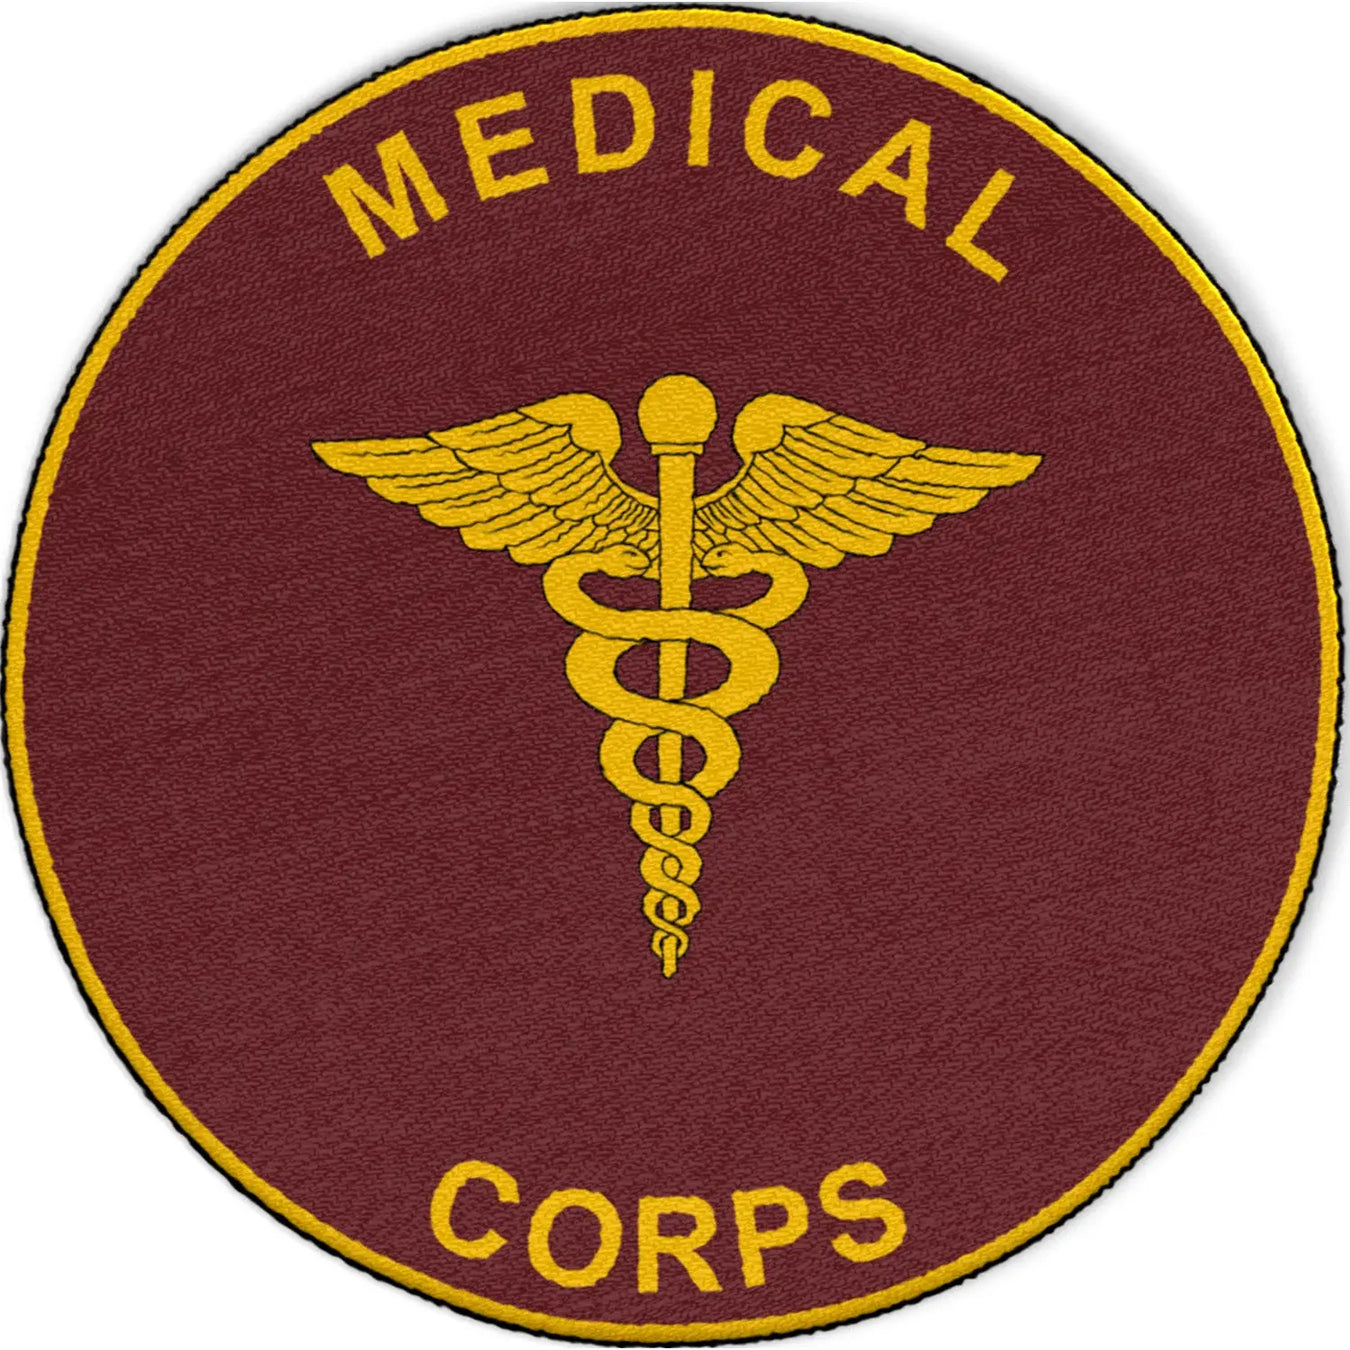 U.S. Army Medical Corps Patches